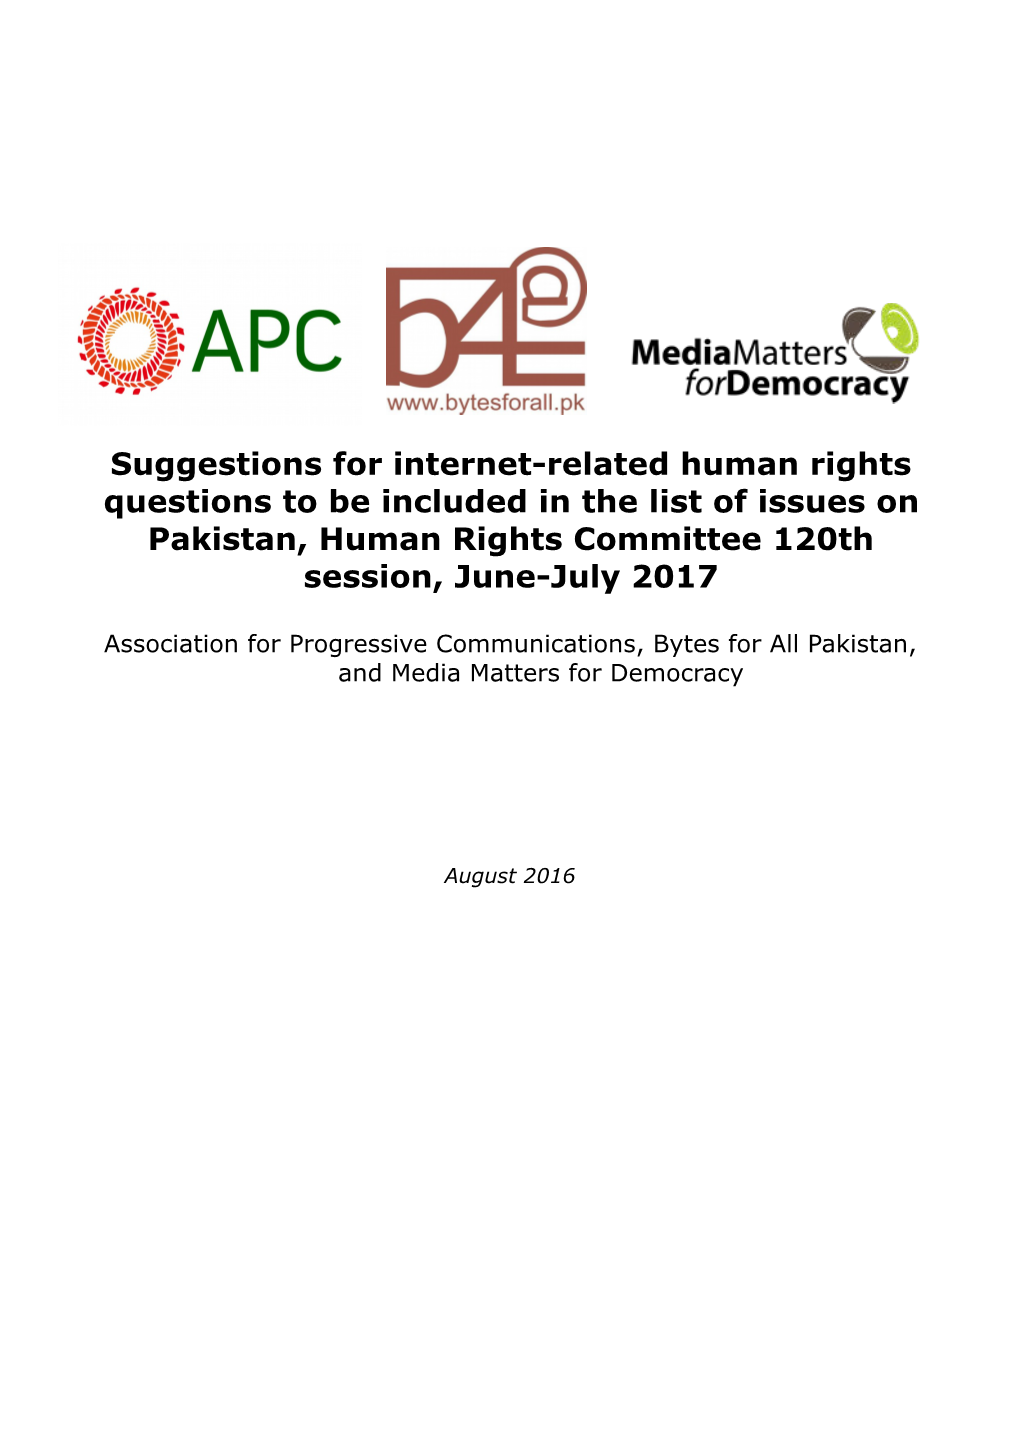 Suggestions for Internet-Related Human Rights Questions to Be Included in the List of Issues on Pakistan, Human Rights Committee 120Th Session, June-July 2017